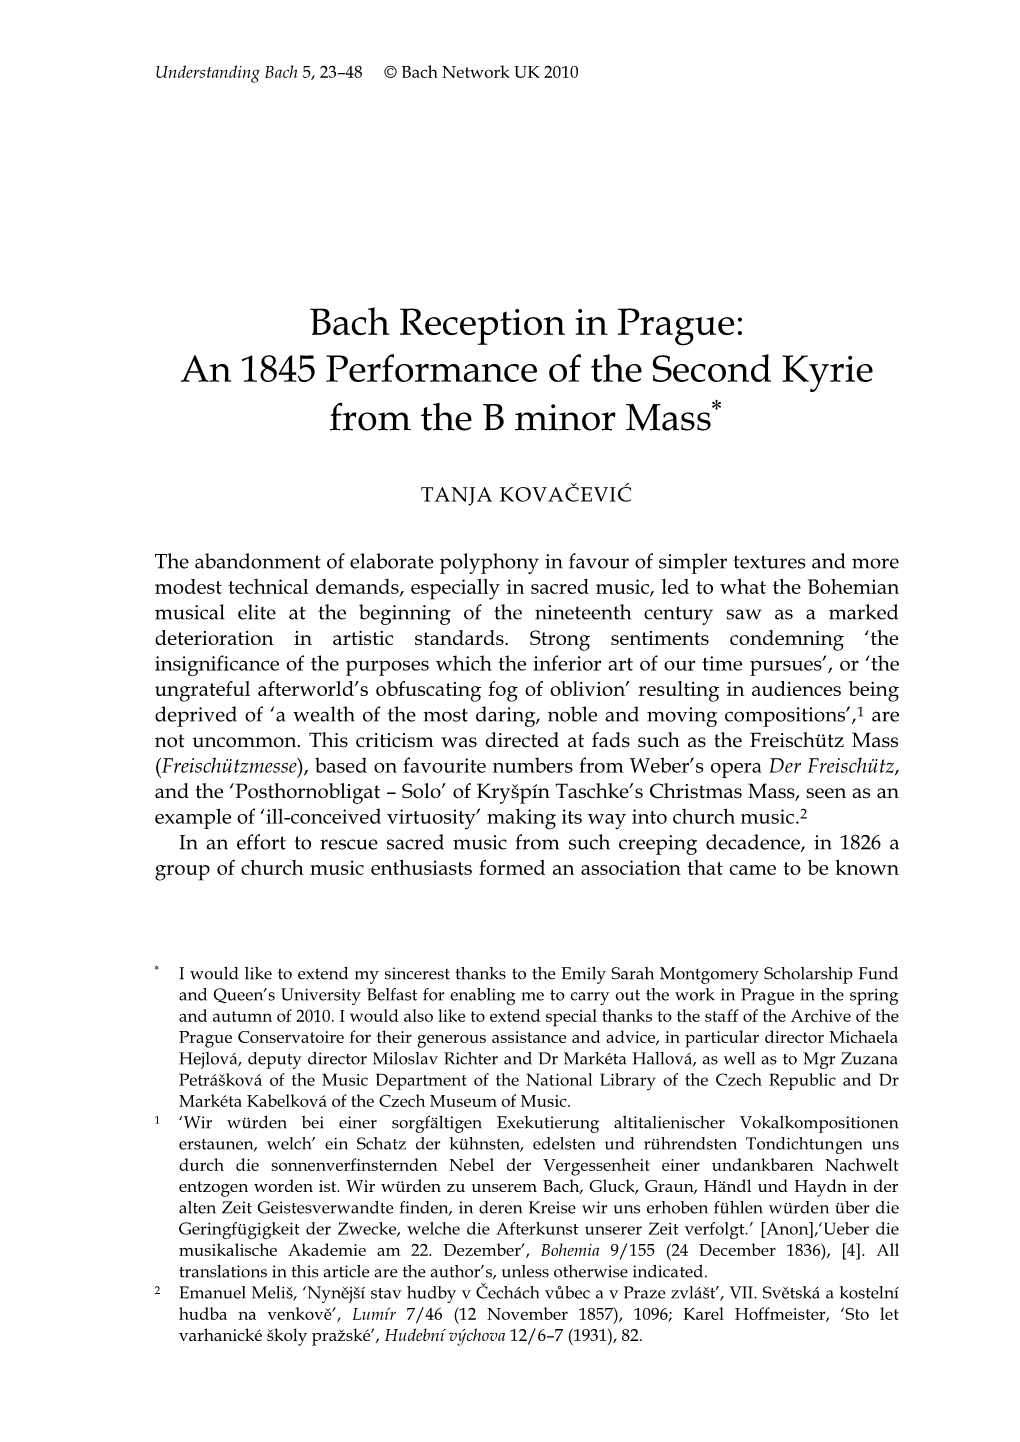 Bach Reception in Prague: an 1845 Performance of the Second Kyrie from the B Minor Mass